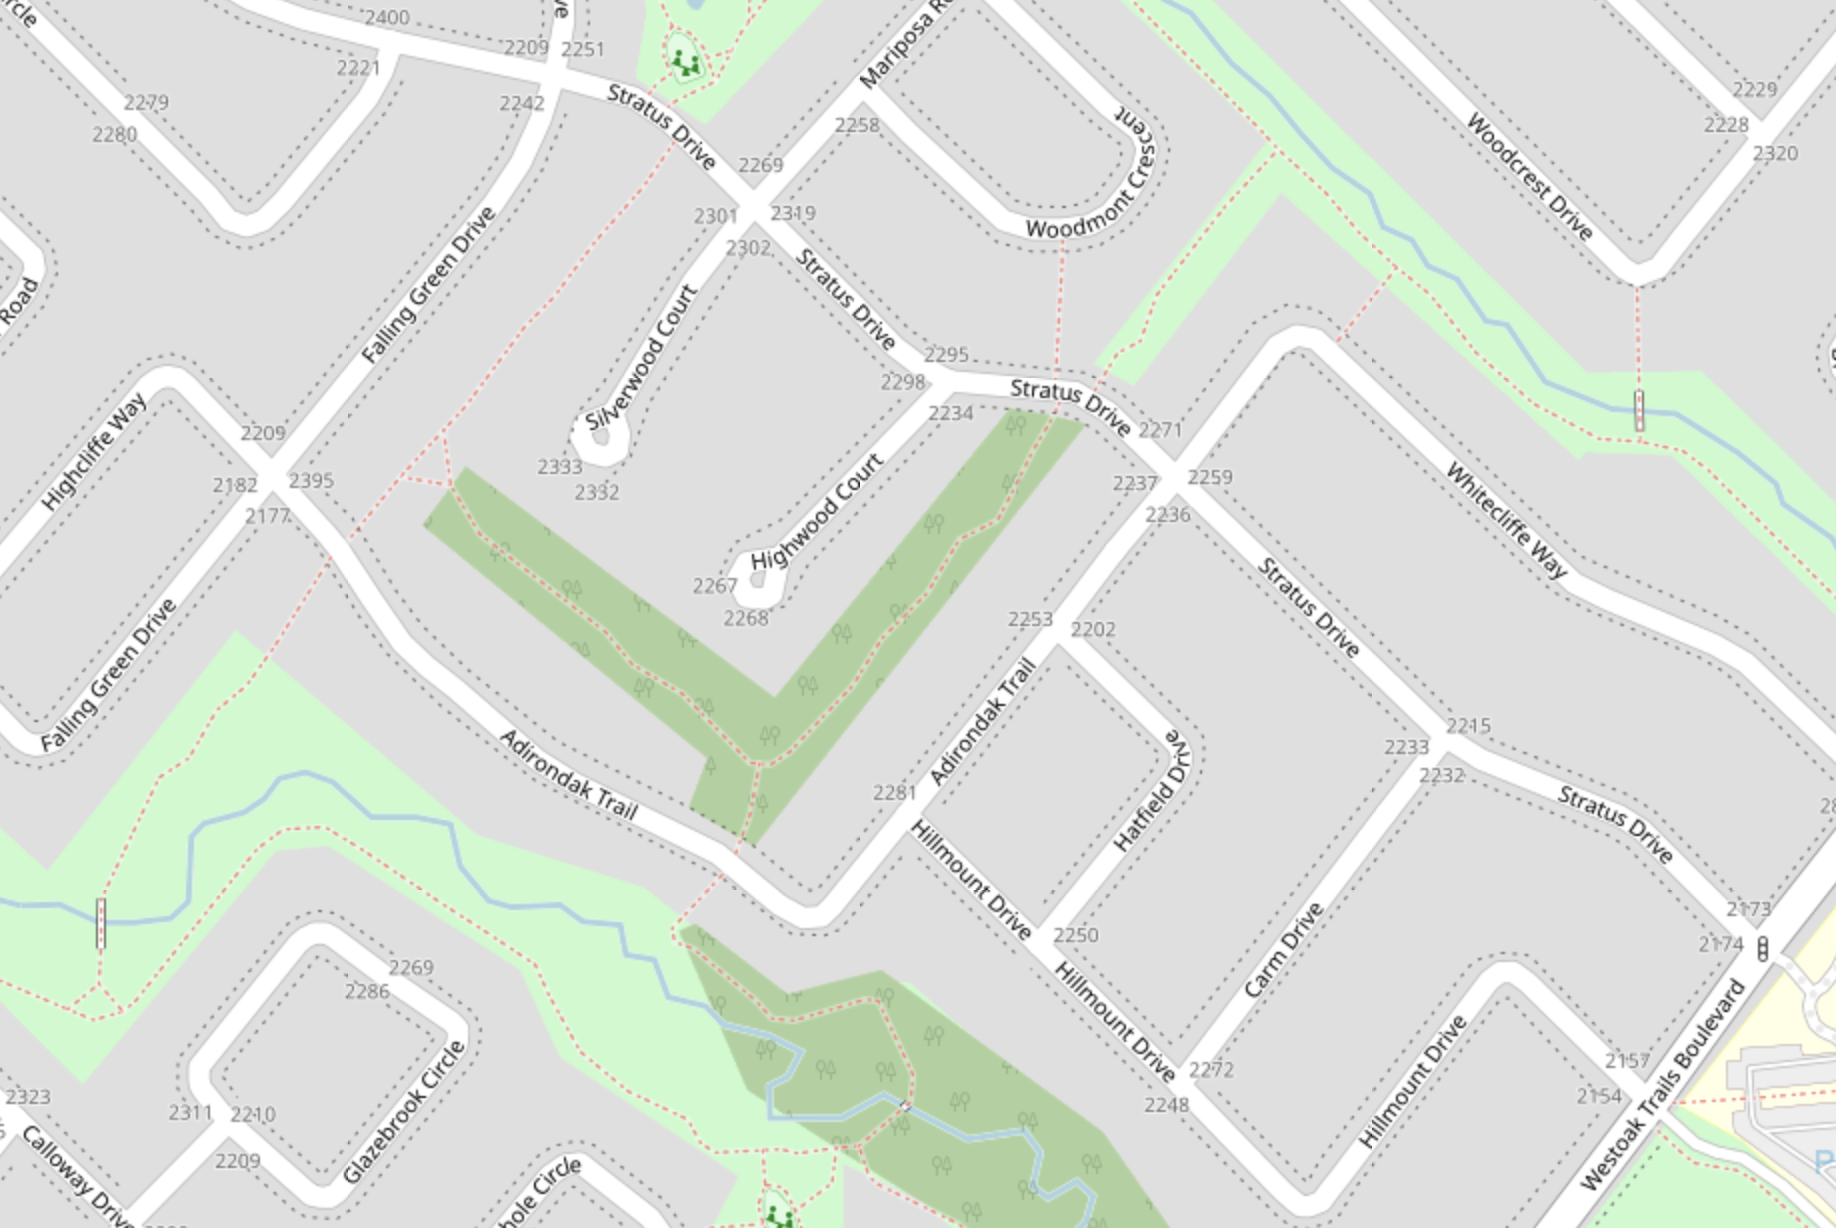 Location of the first auto theft | Openstreetmap